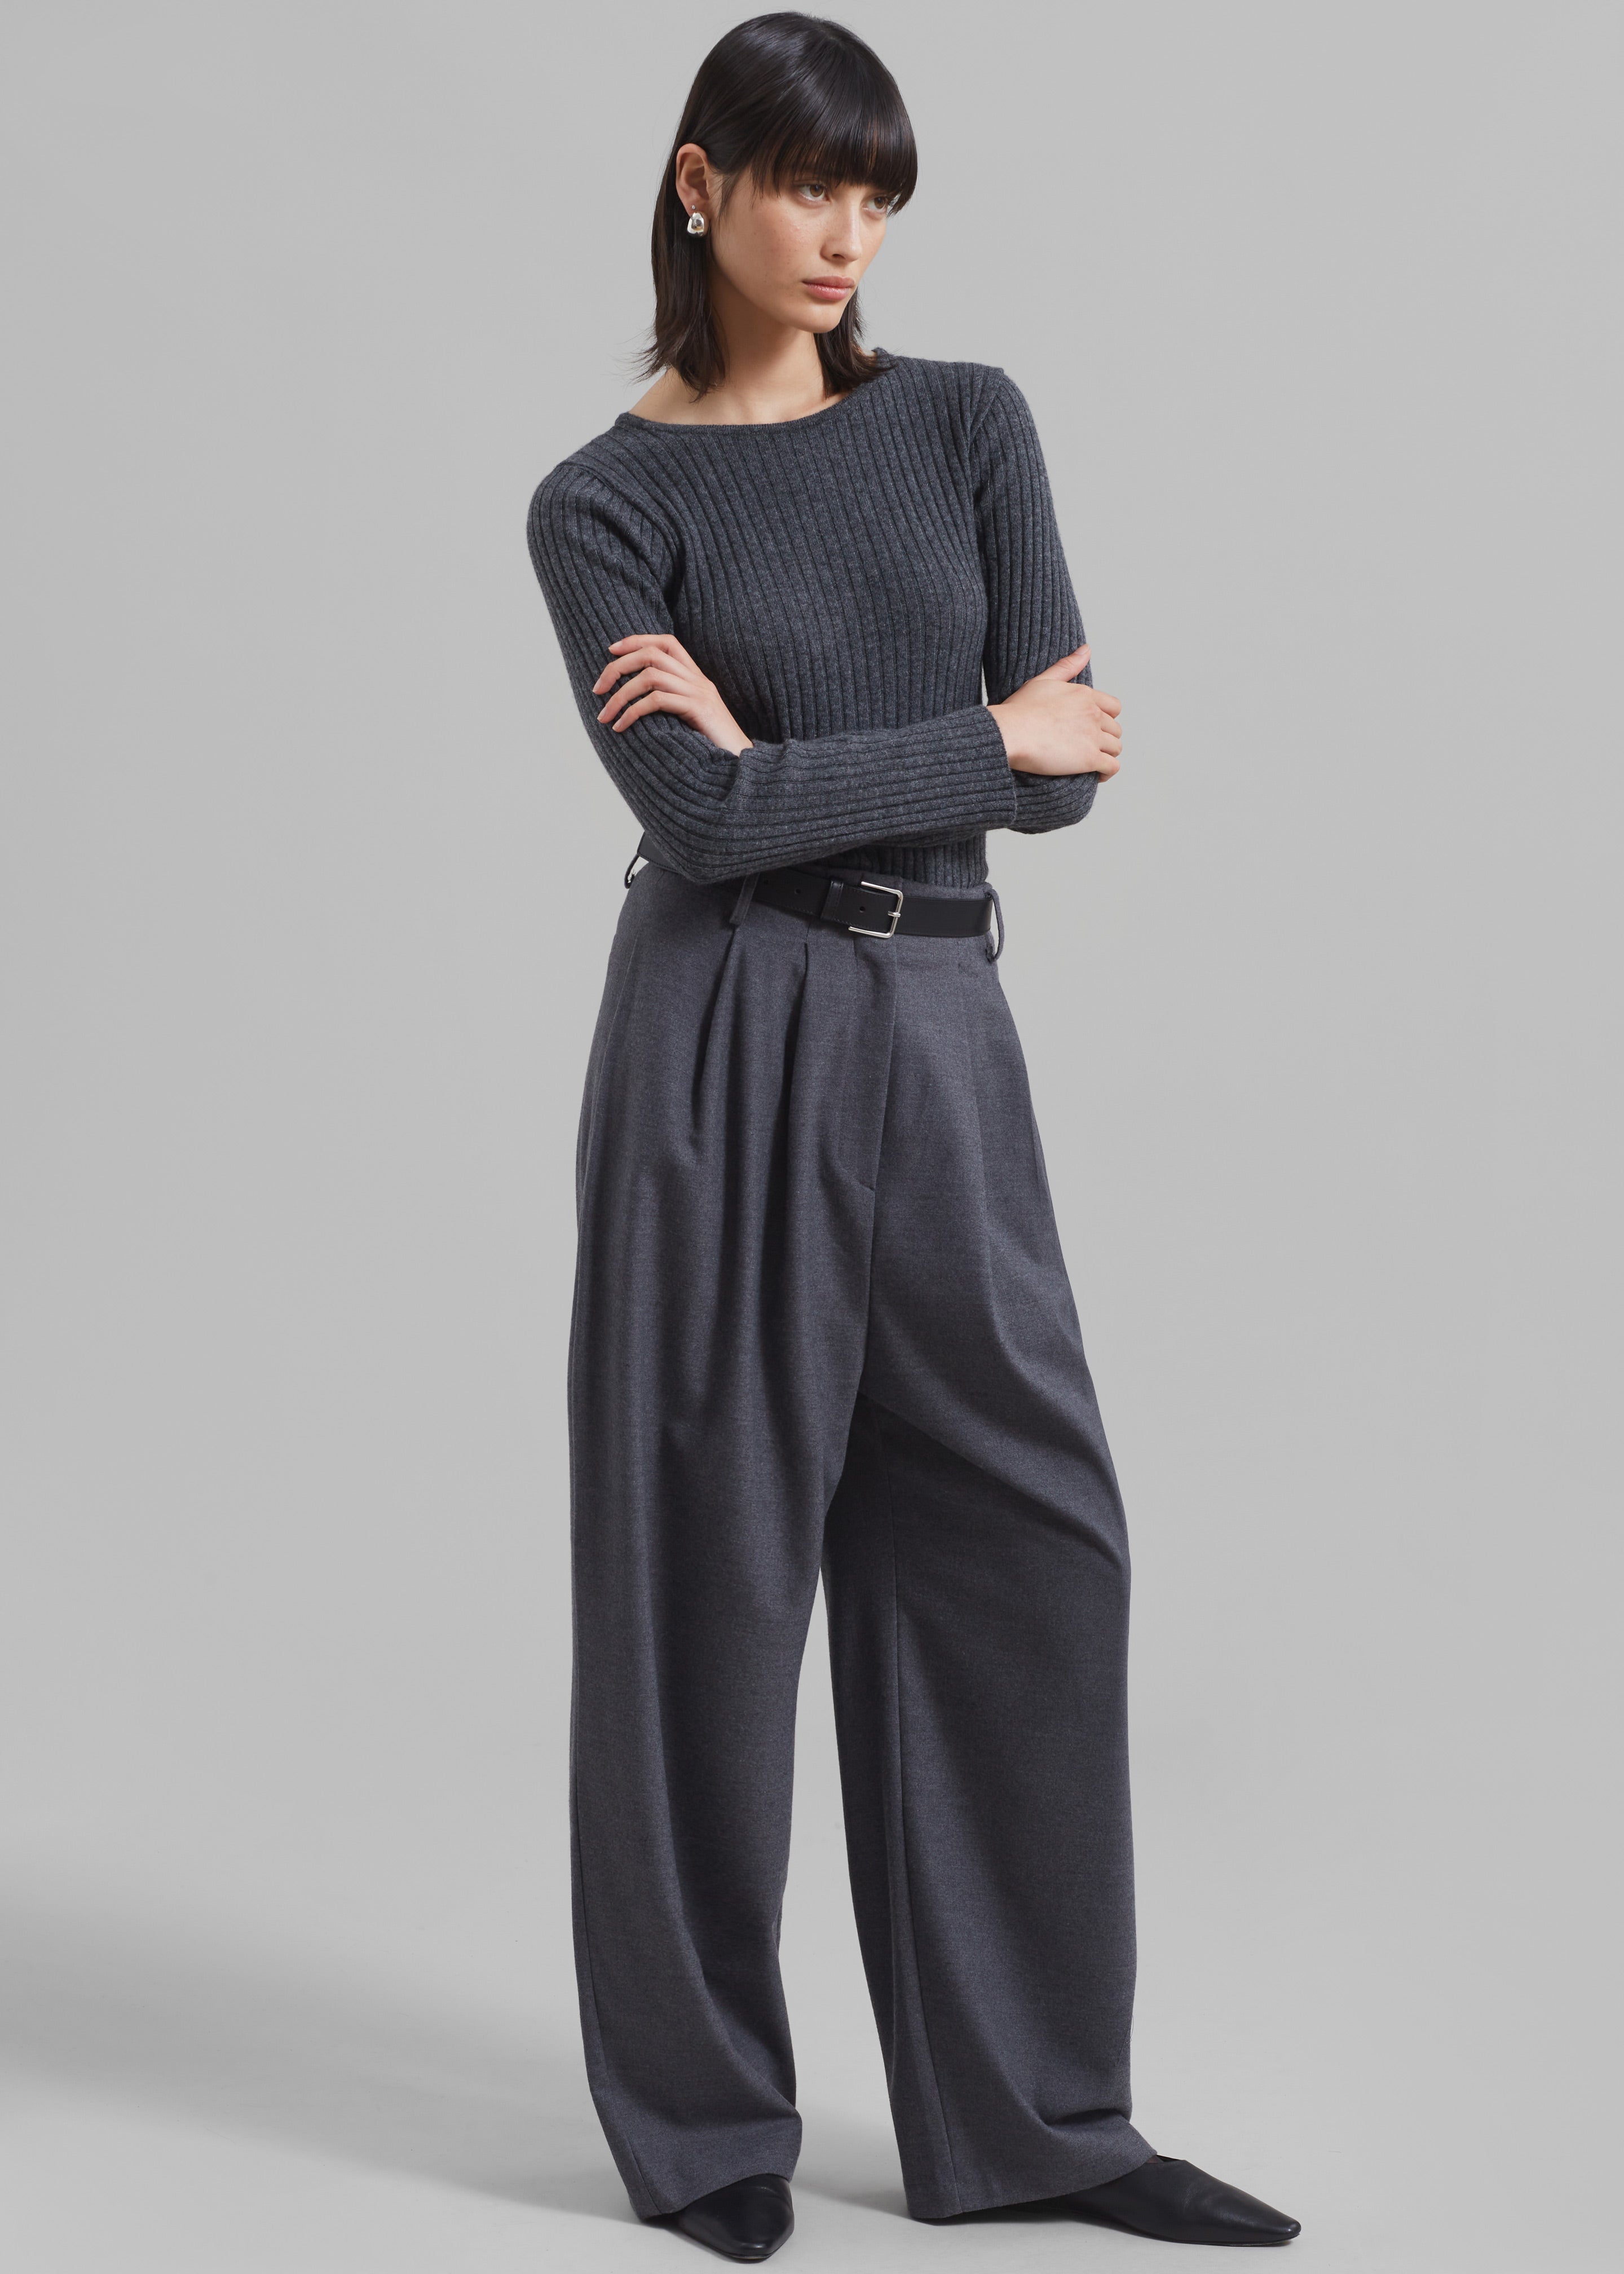 Cora Ribbed Sweater - Charcoal - 2